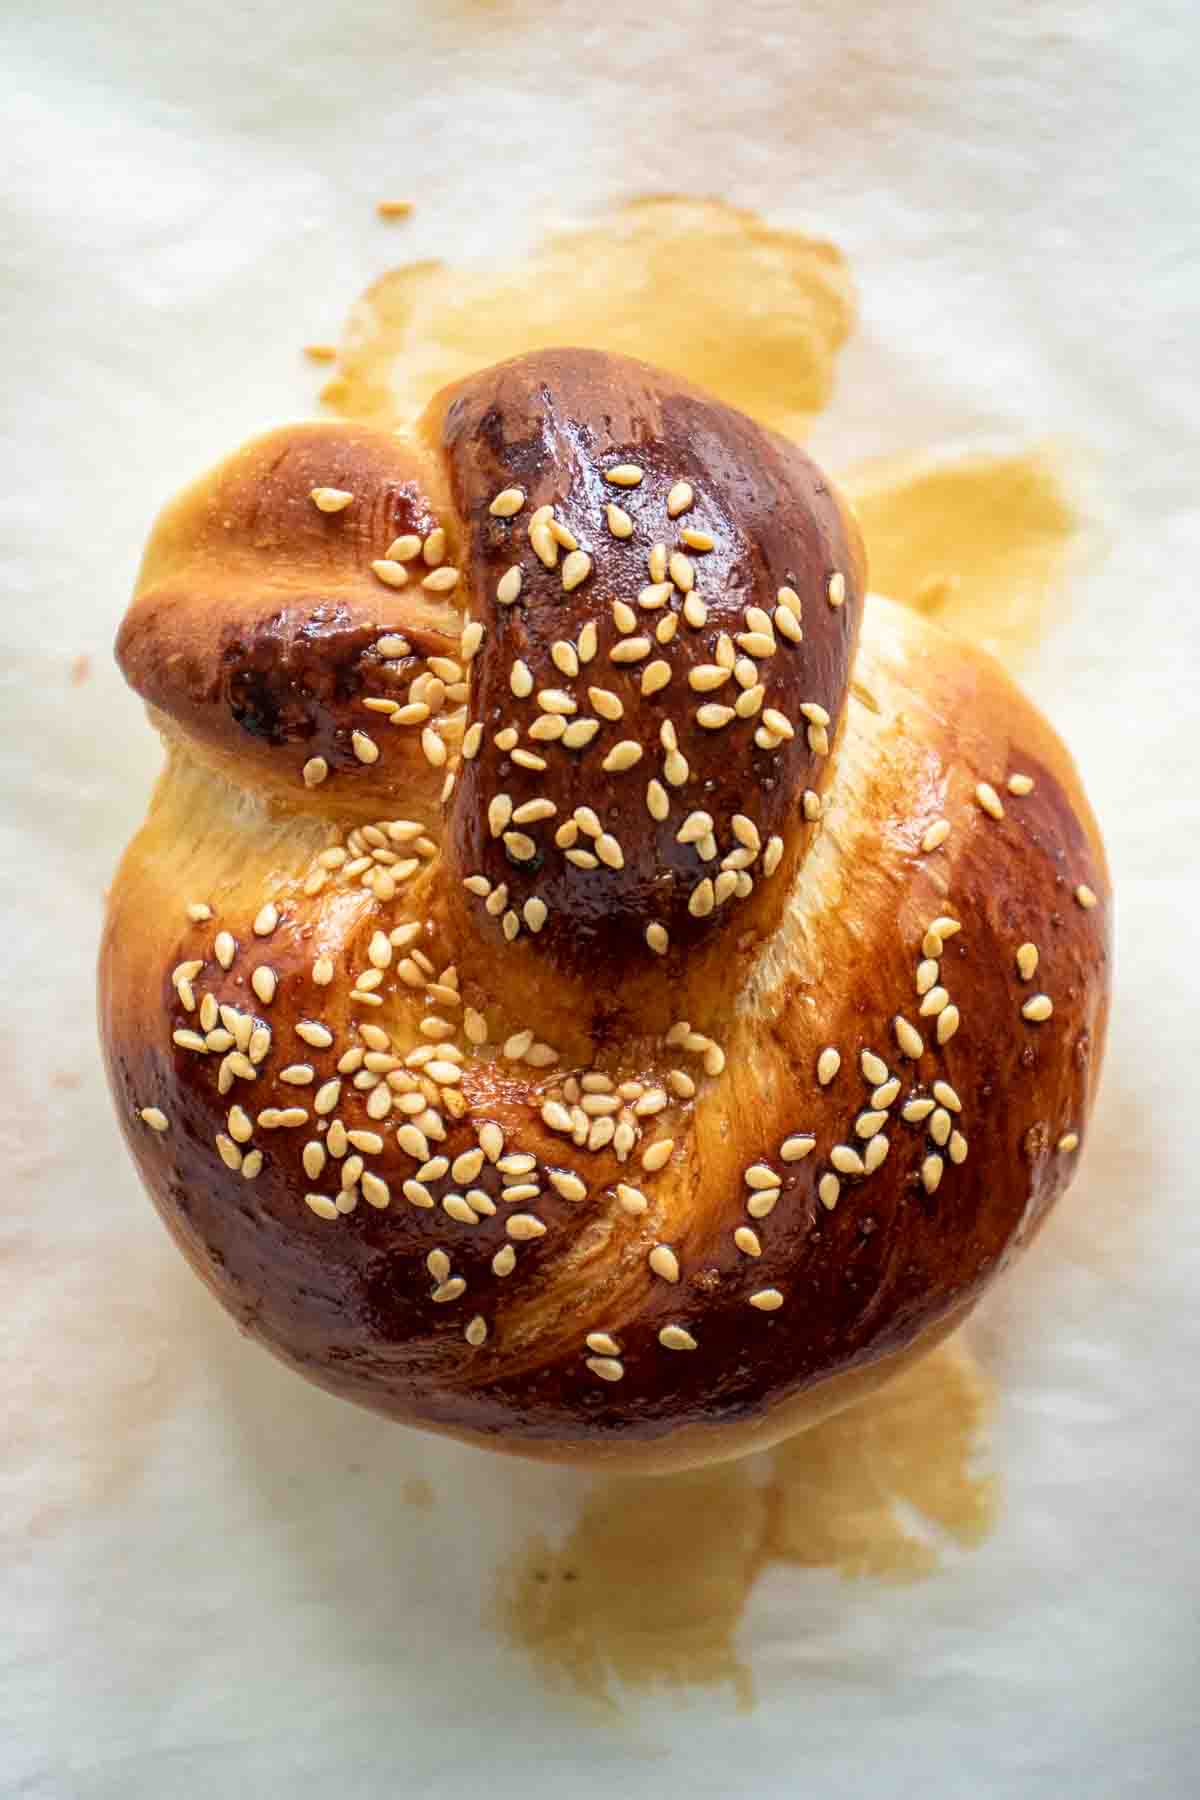 A baked challah roll over parchment paper.